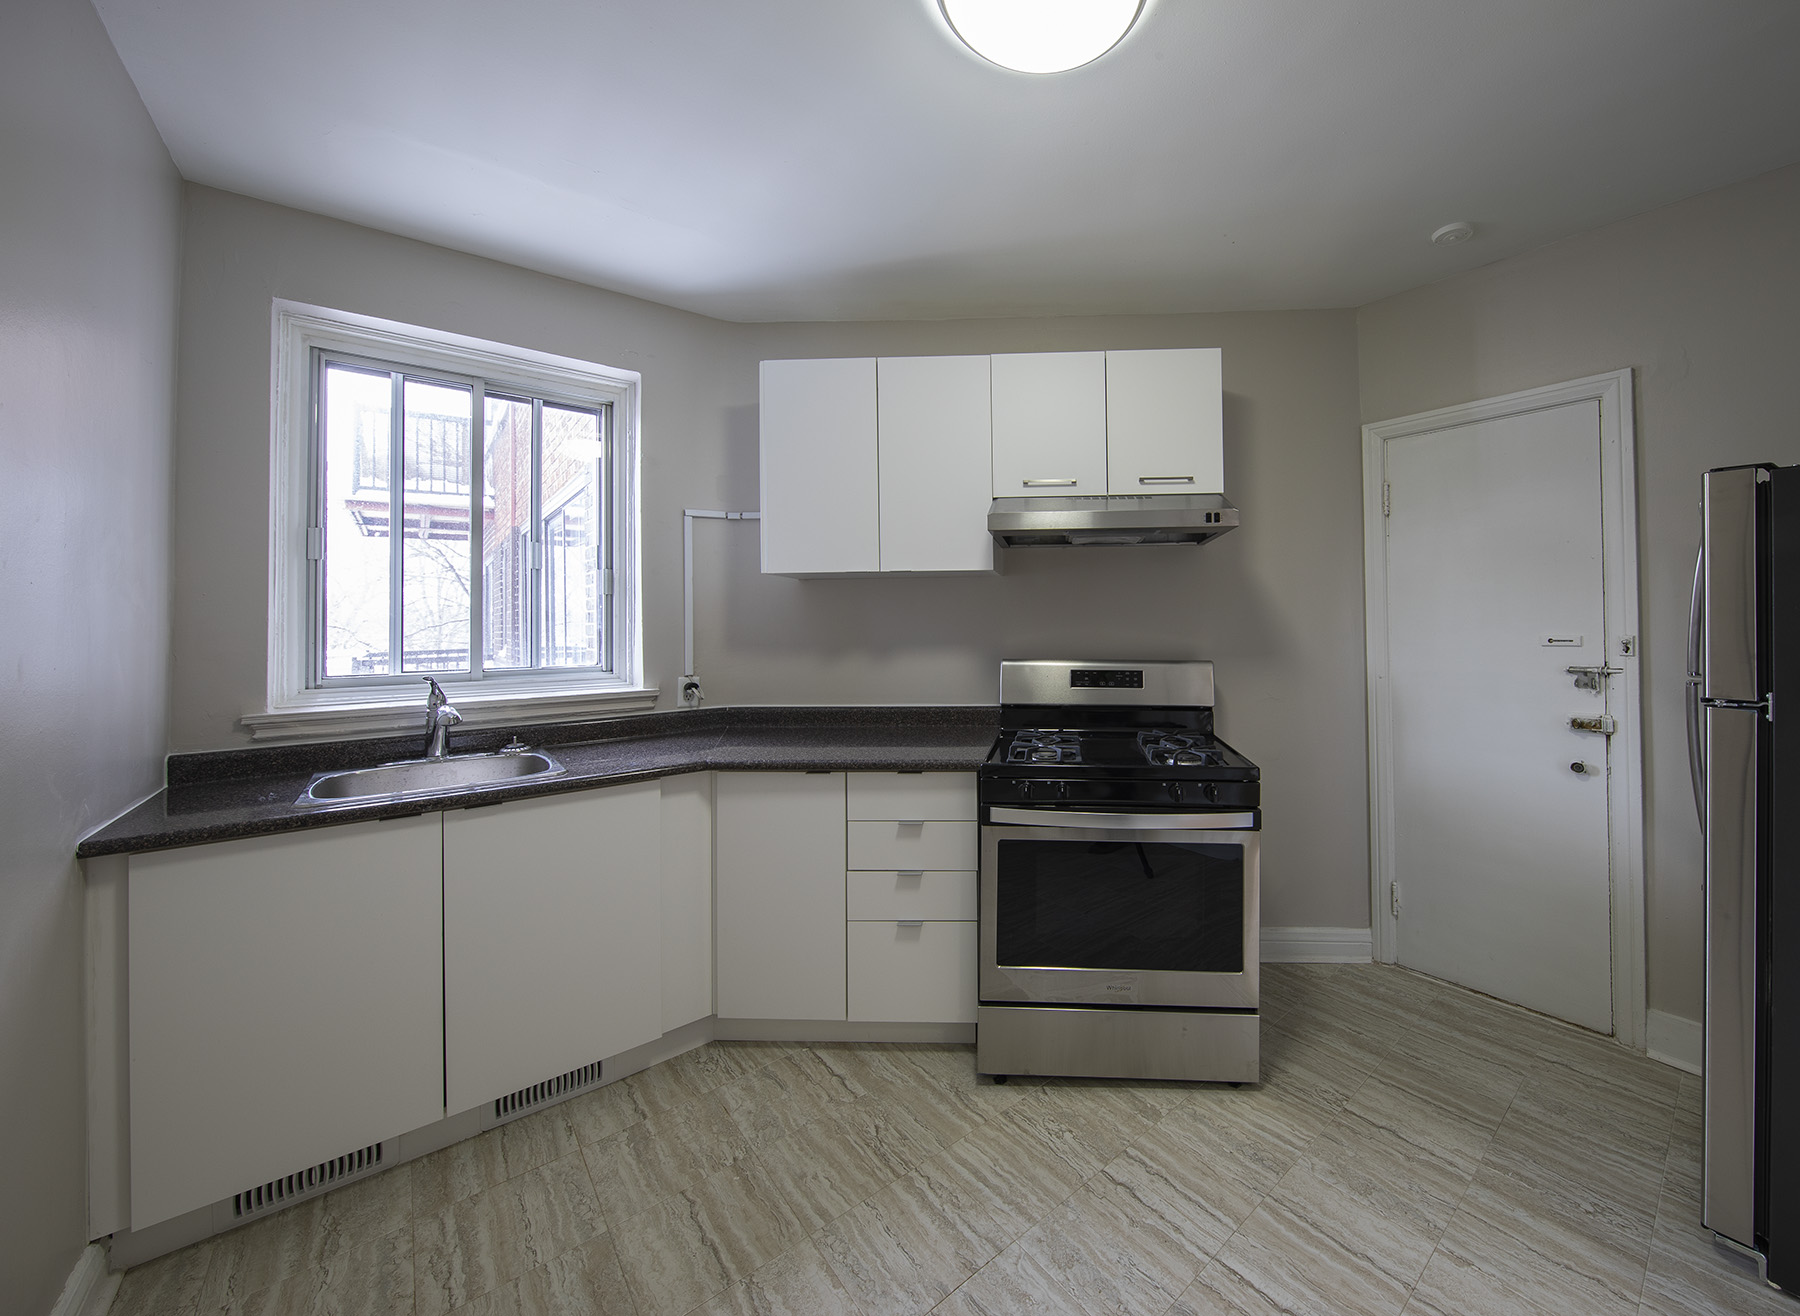 2 bedroom Apartments for rent in Notre-Dame-de-Grace at 6325 Somerled - Photo 10 - RentersPages – L401540